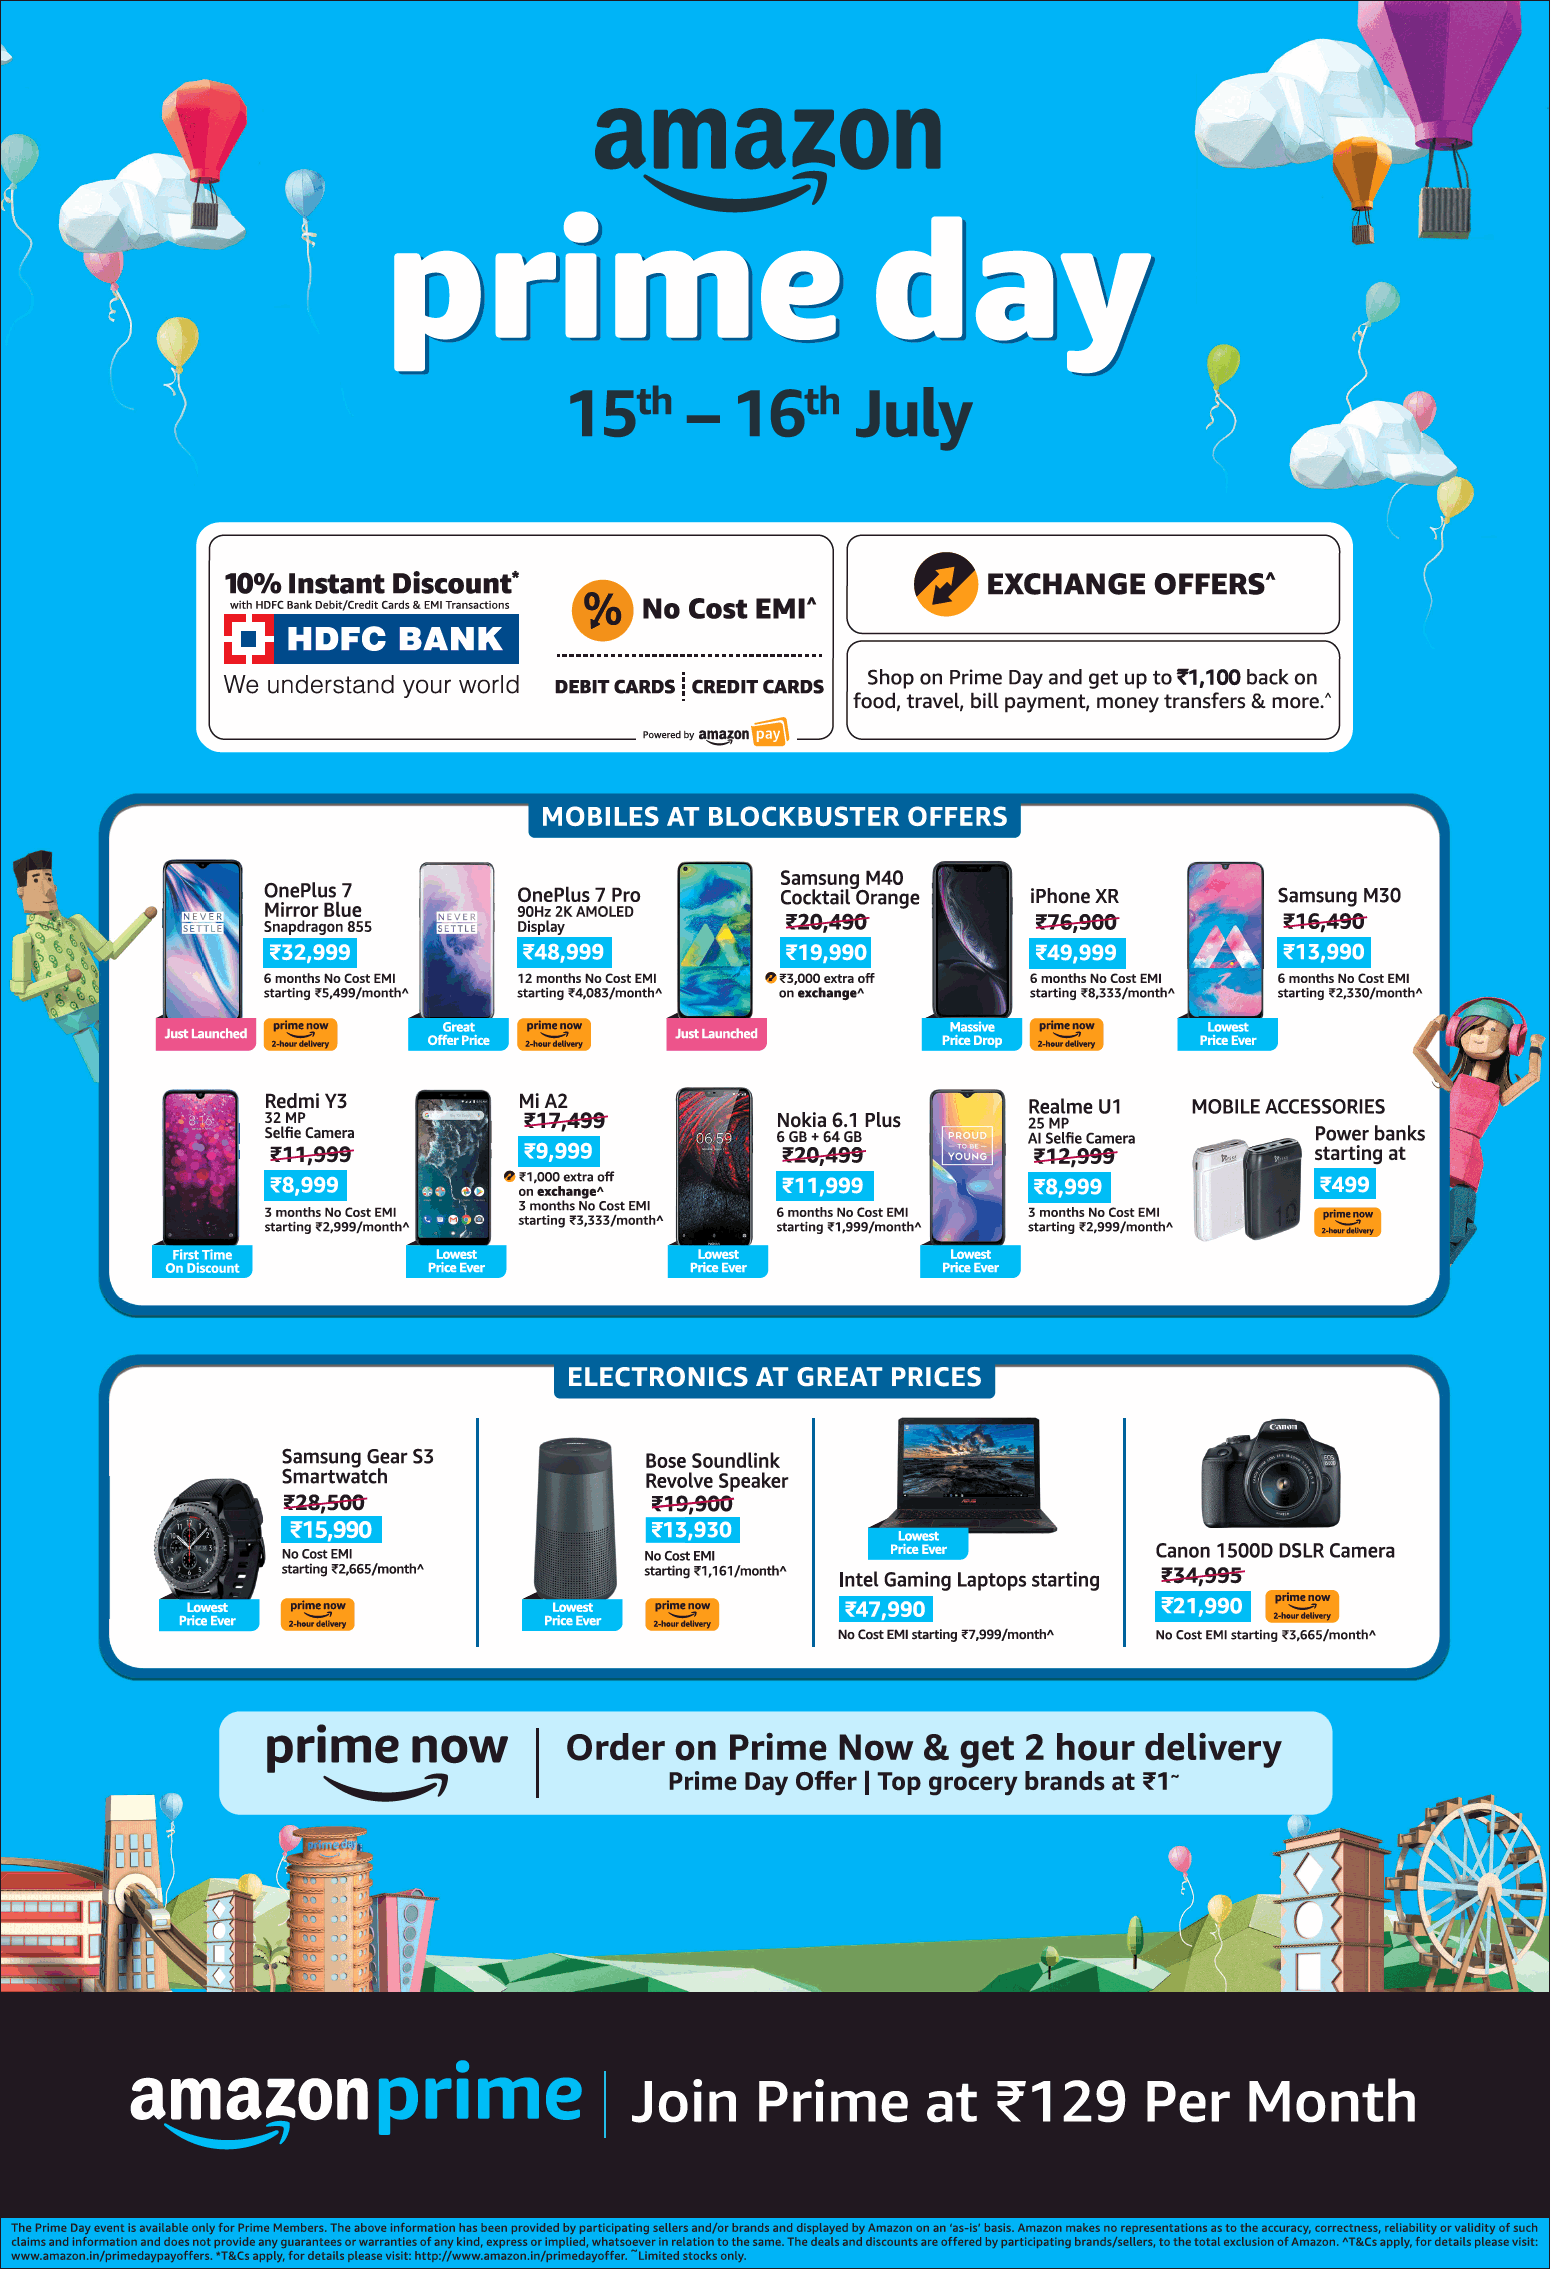 amazon-prime-day-15th-to-16th-july-exchange-offers-ad-times-of-india-delhi-14-07-2019.png